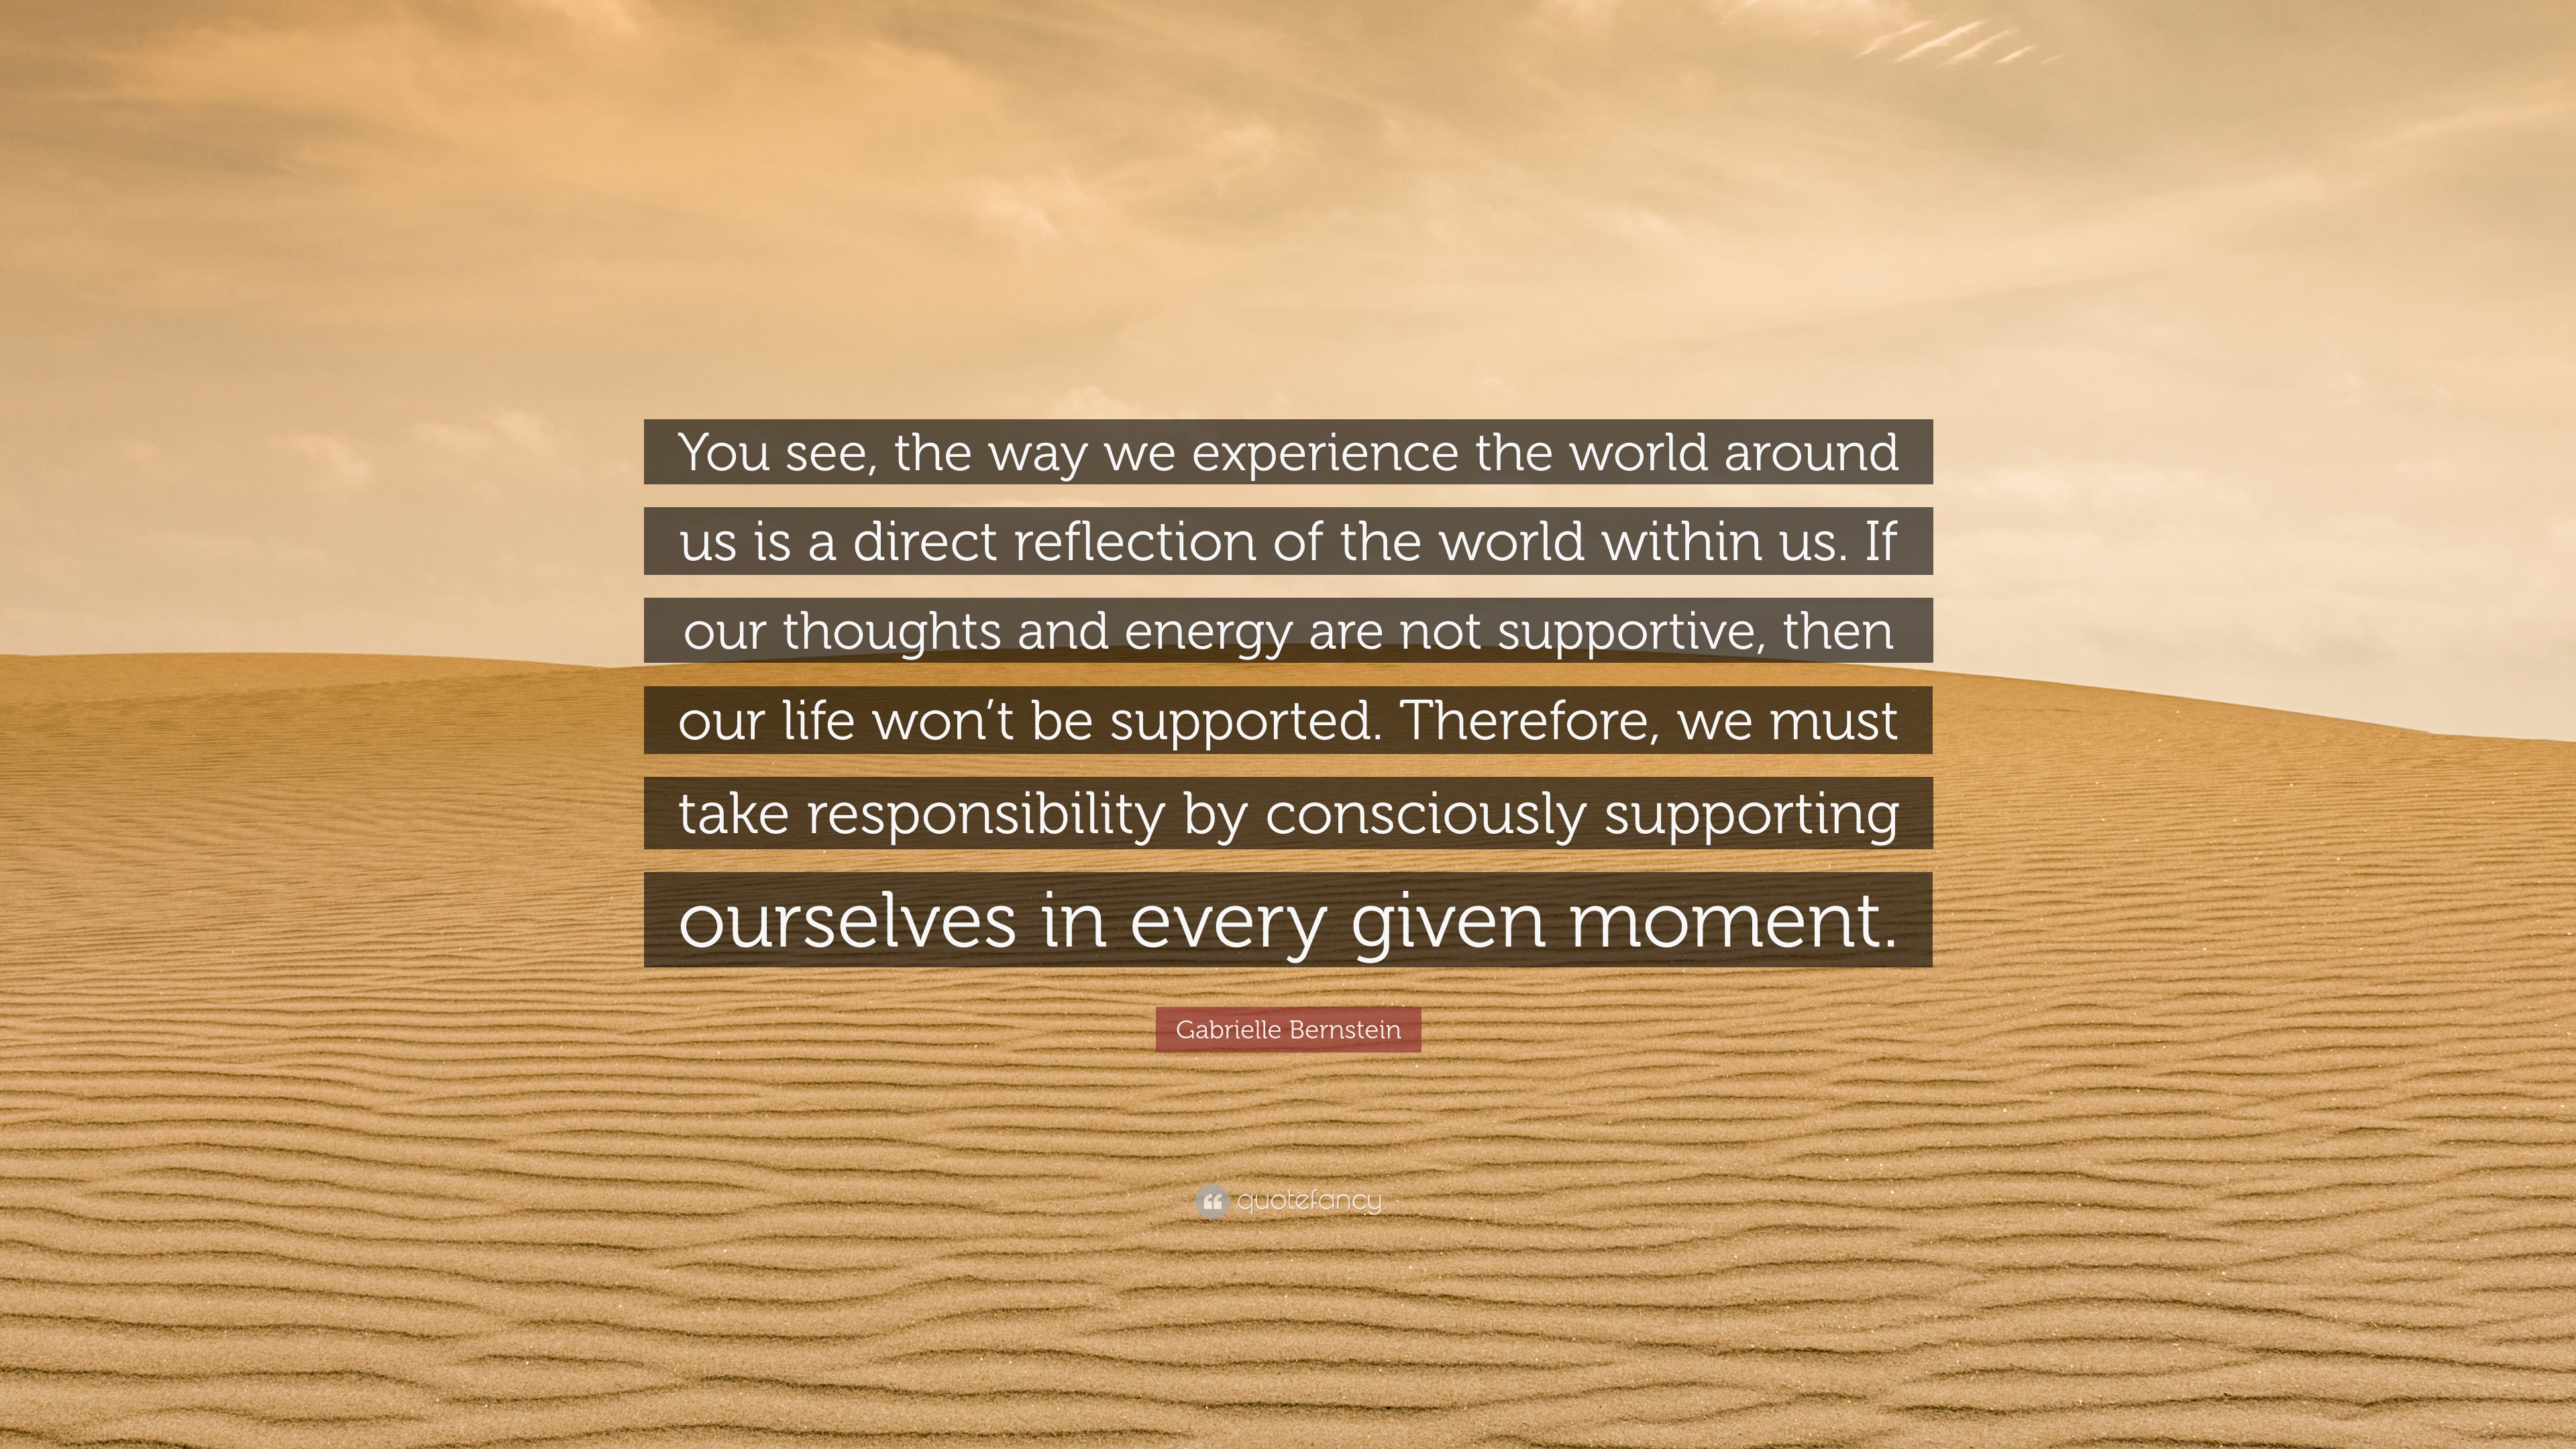 Gabrielle Bernstein Quote: “You see, the way we experience the world ...